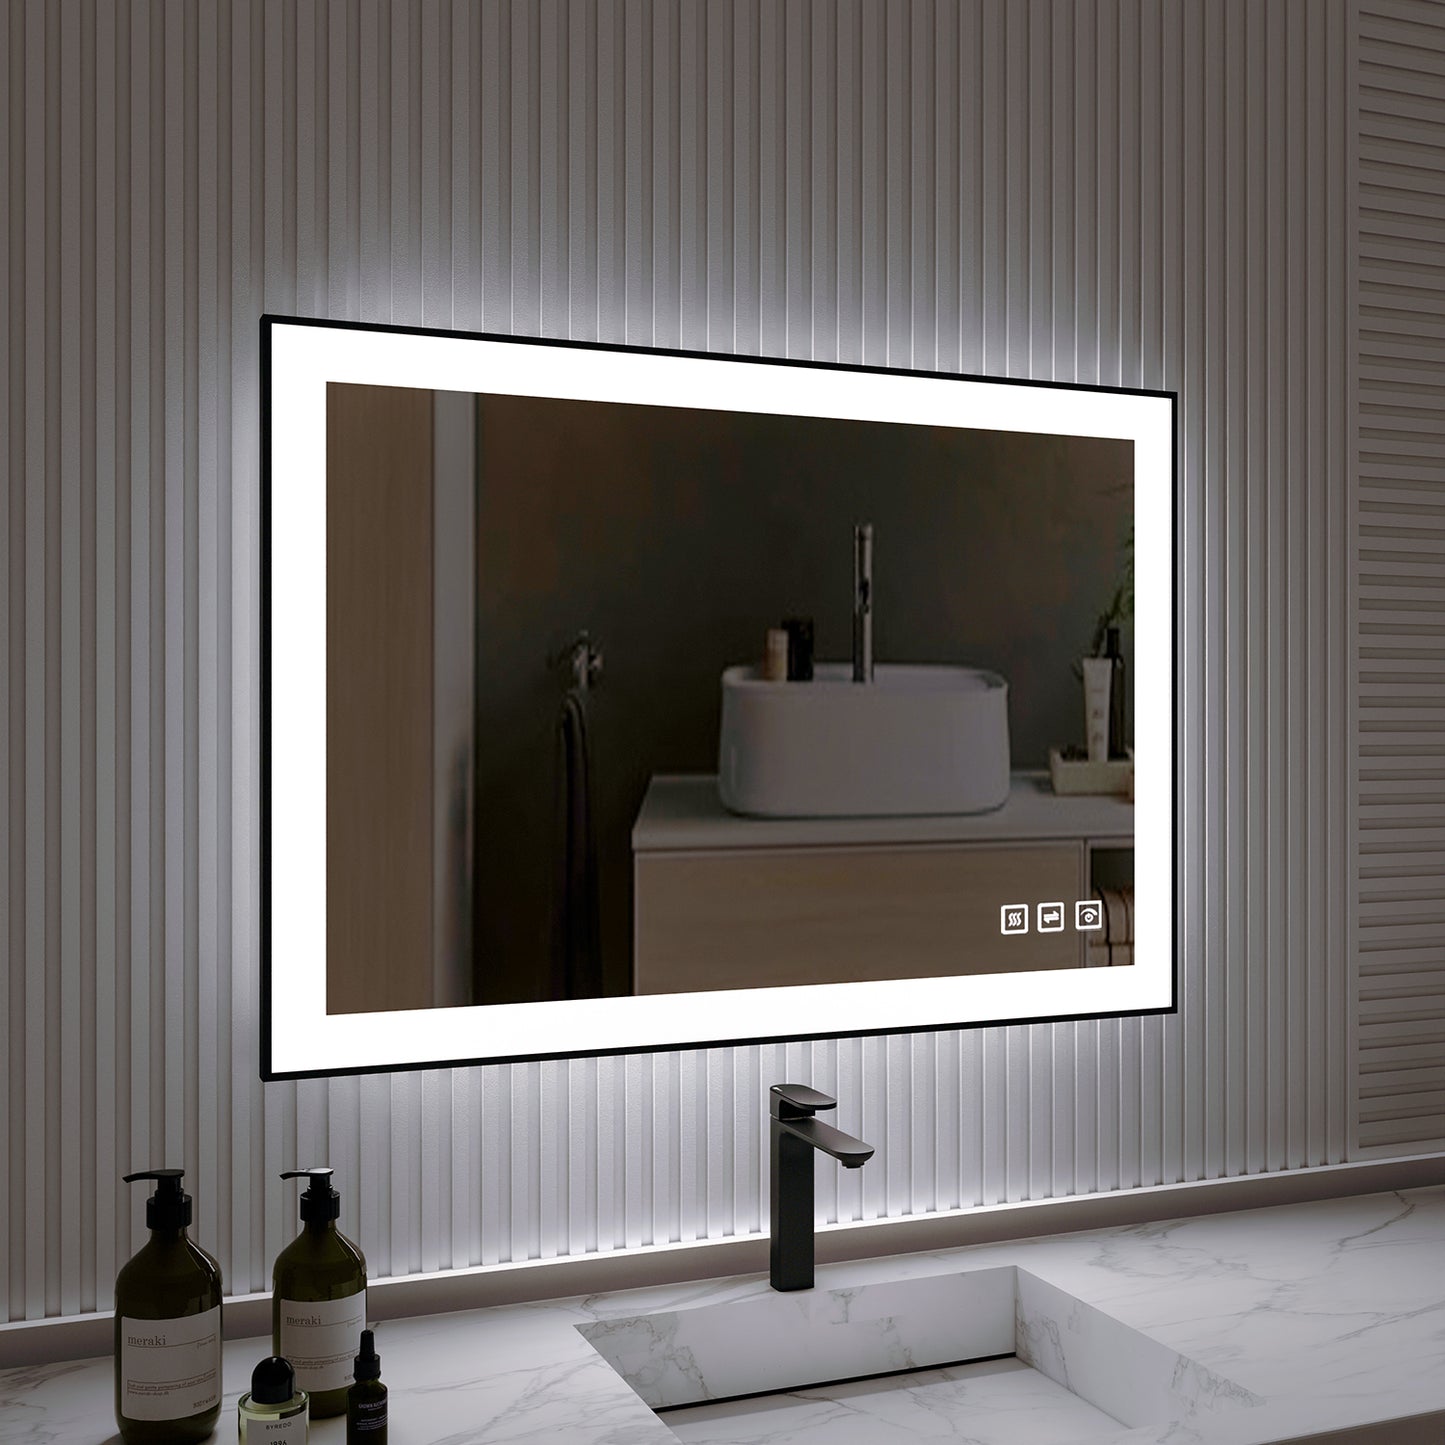 Waterpar® 40 in. W x 24 in. H Rectangular Framed Anti-Fog LED Wall Bathroom Vanity Mirror in Black with Backlit and Front Light